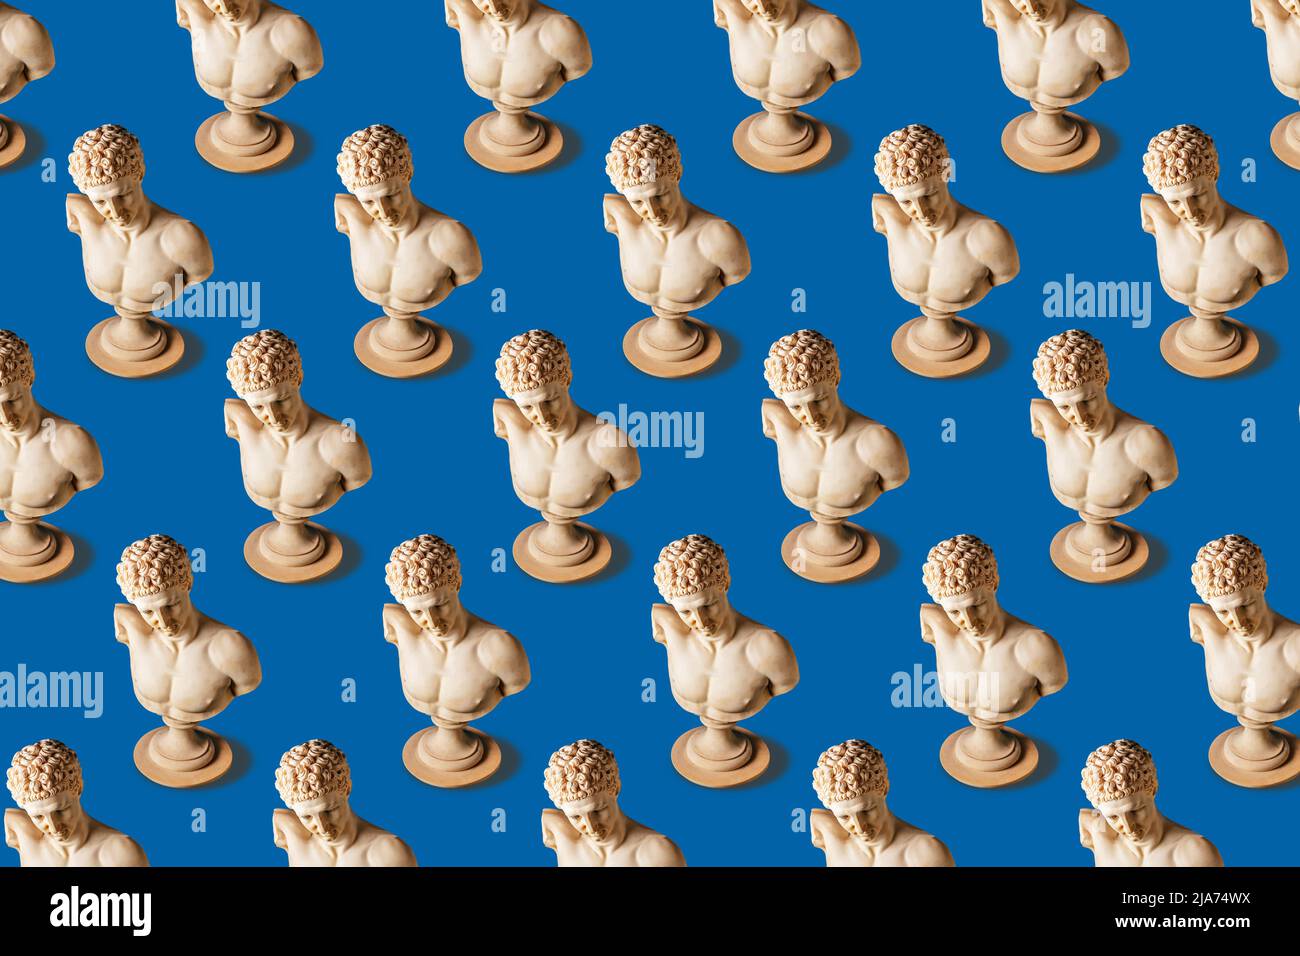 Creative pattern made of old statues on blue background. Minimal art concept. Stock Photo